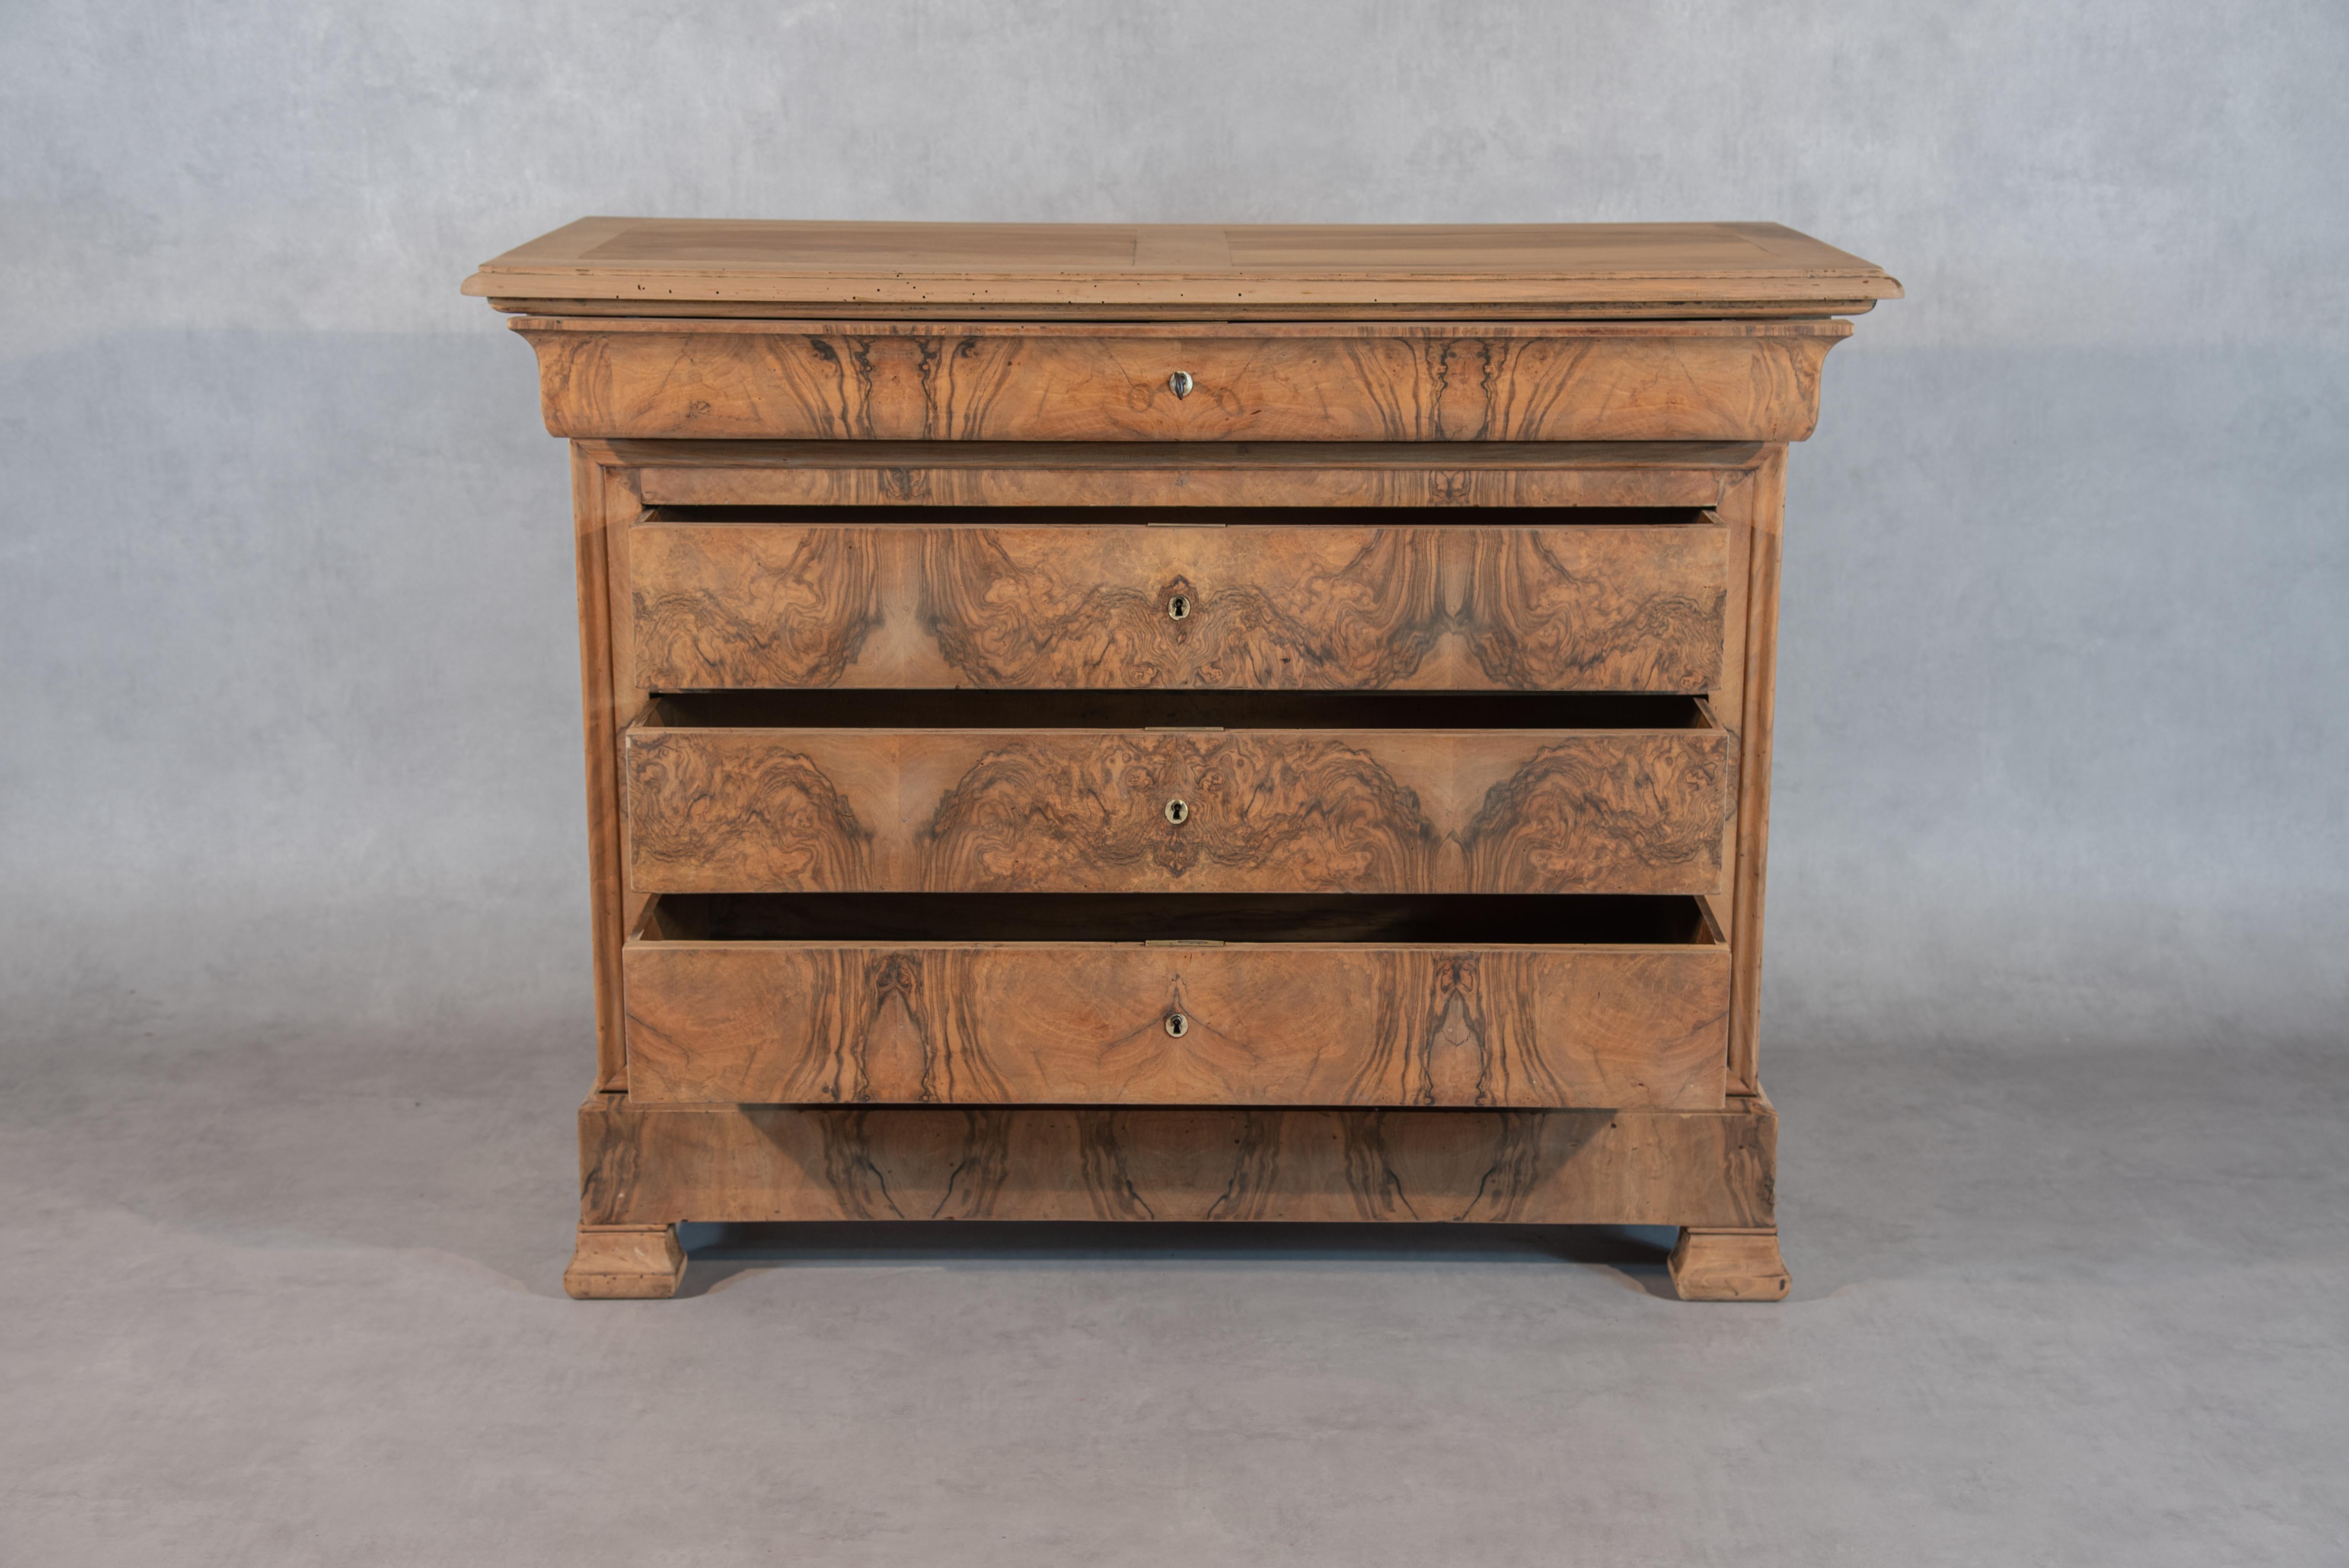 This original French Louis Philippe period commode is a stunning example of the Louis Philippe style. This style was prominent in France during the mid-19th century and was known for its understated elegance and attention to detail. Furniture during